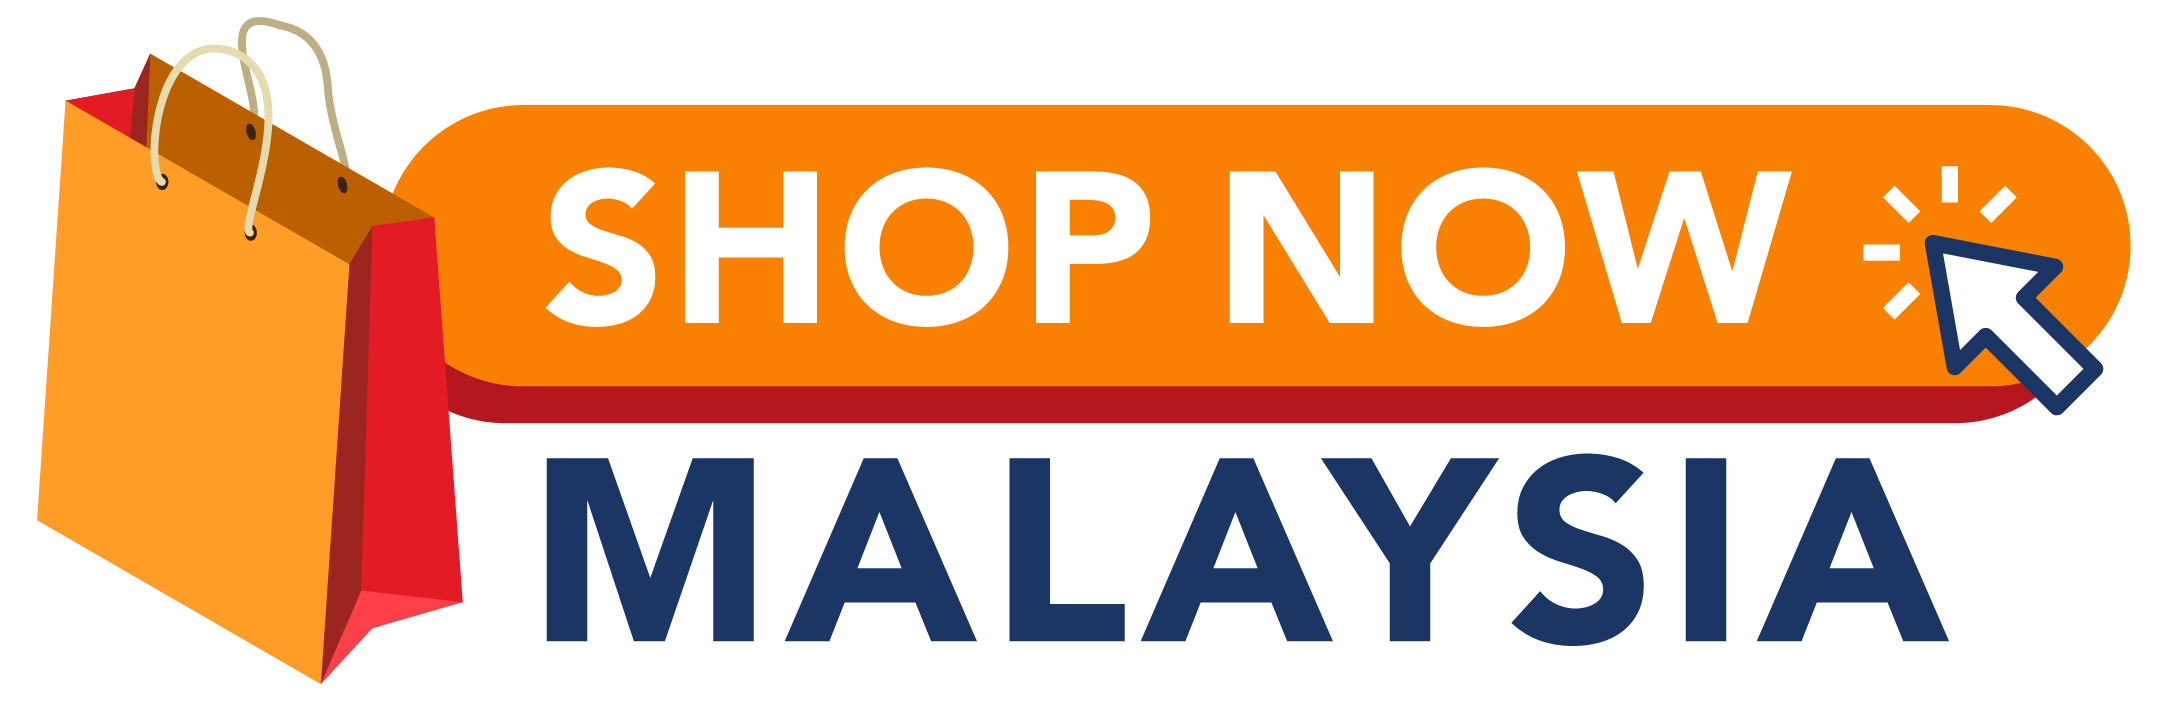 New Image Shop Now Malaysia